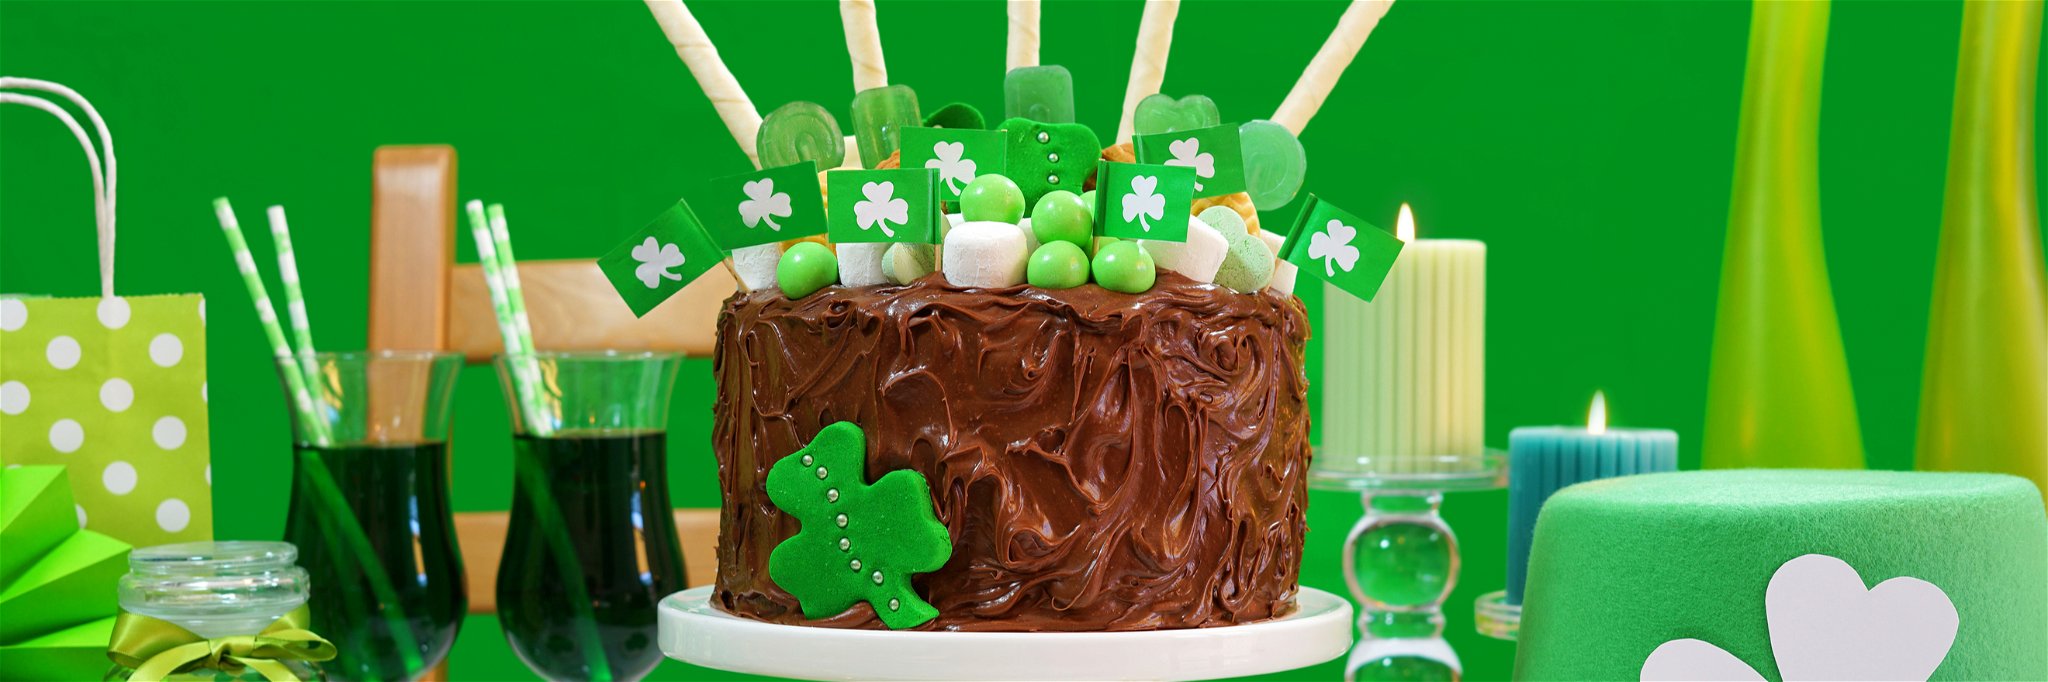 Chocolate cake&nbsp;is perfect&nbsp;to celebrate&nbsp;St Patrick’s Day